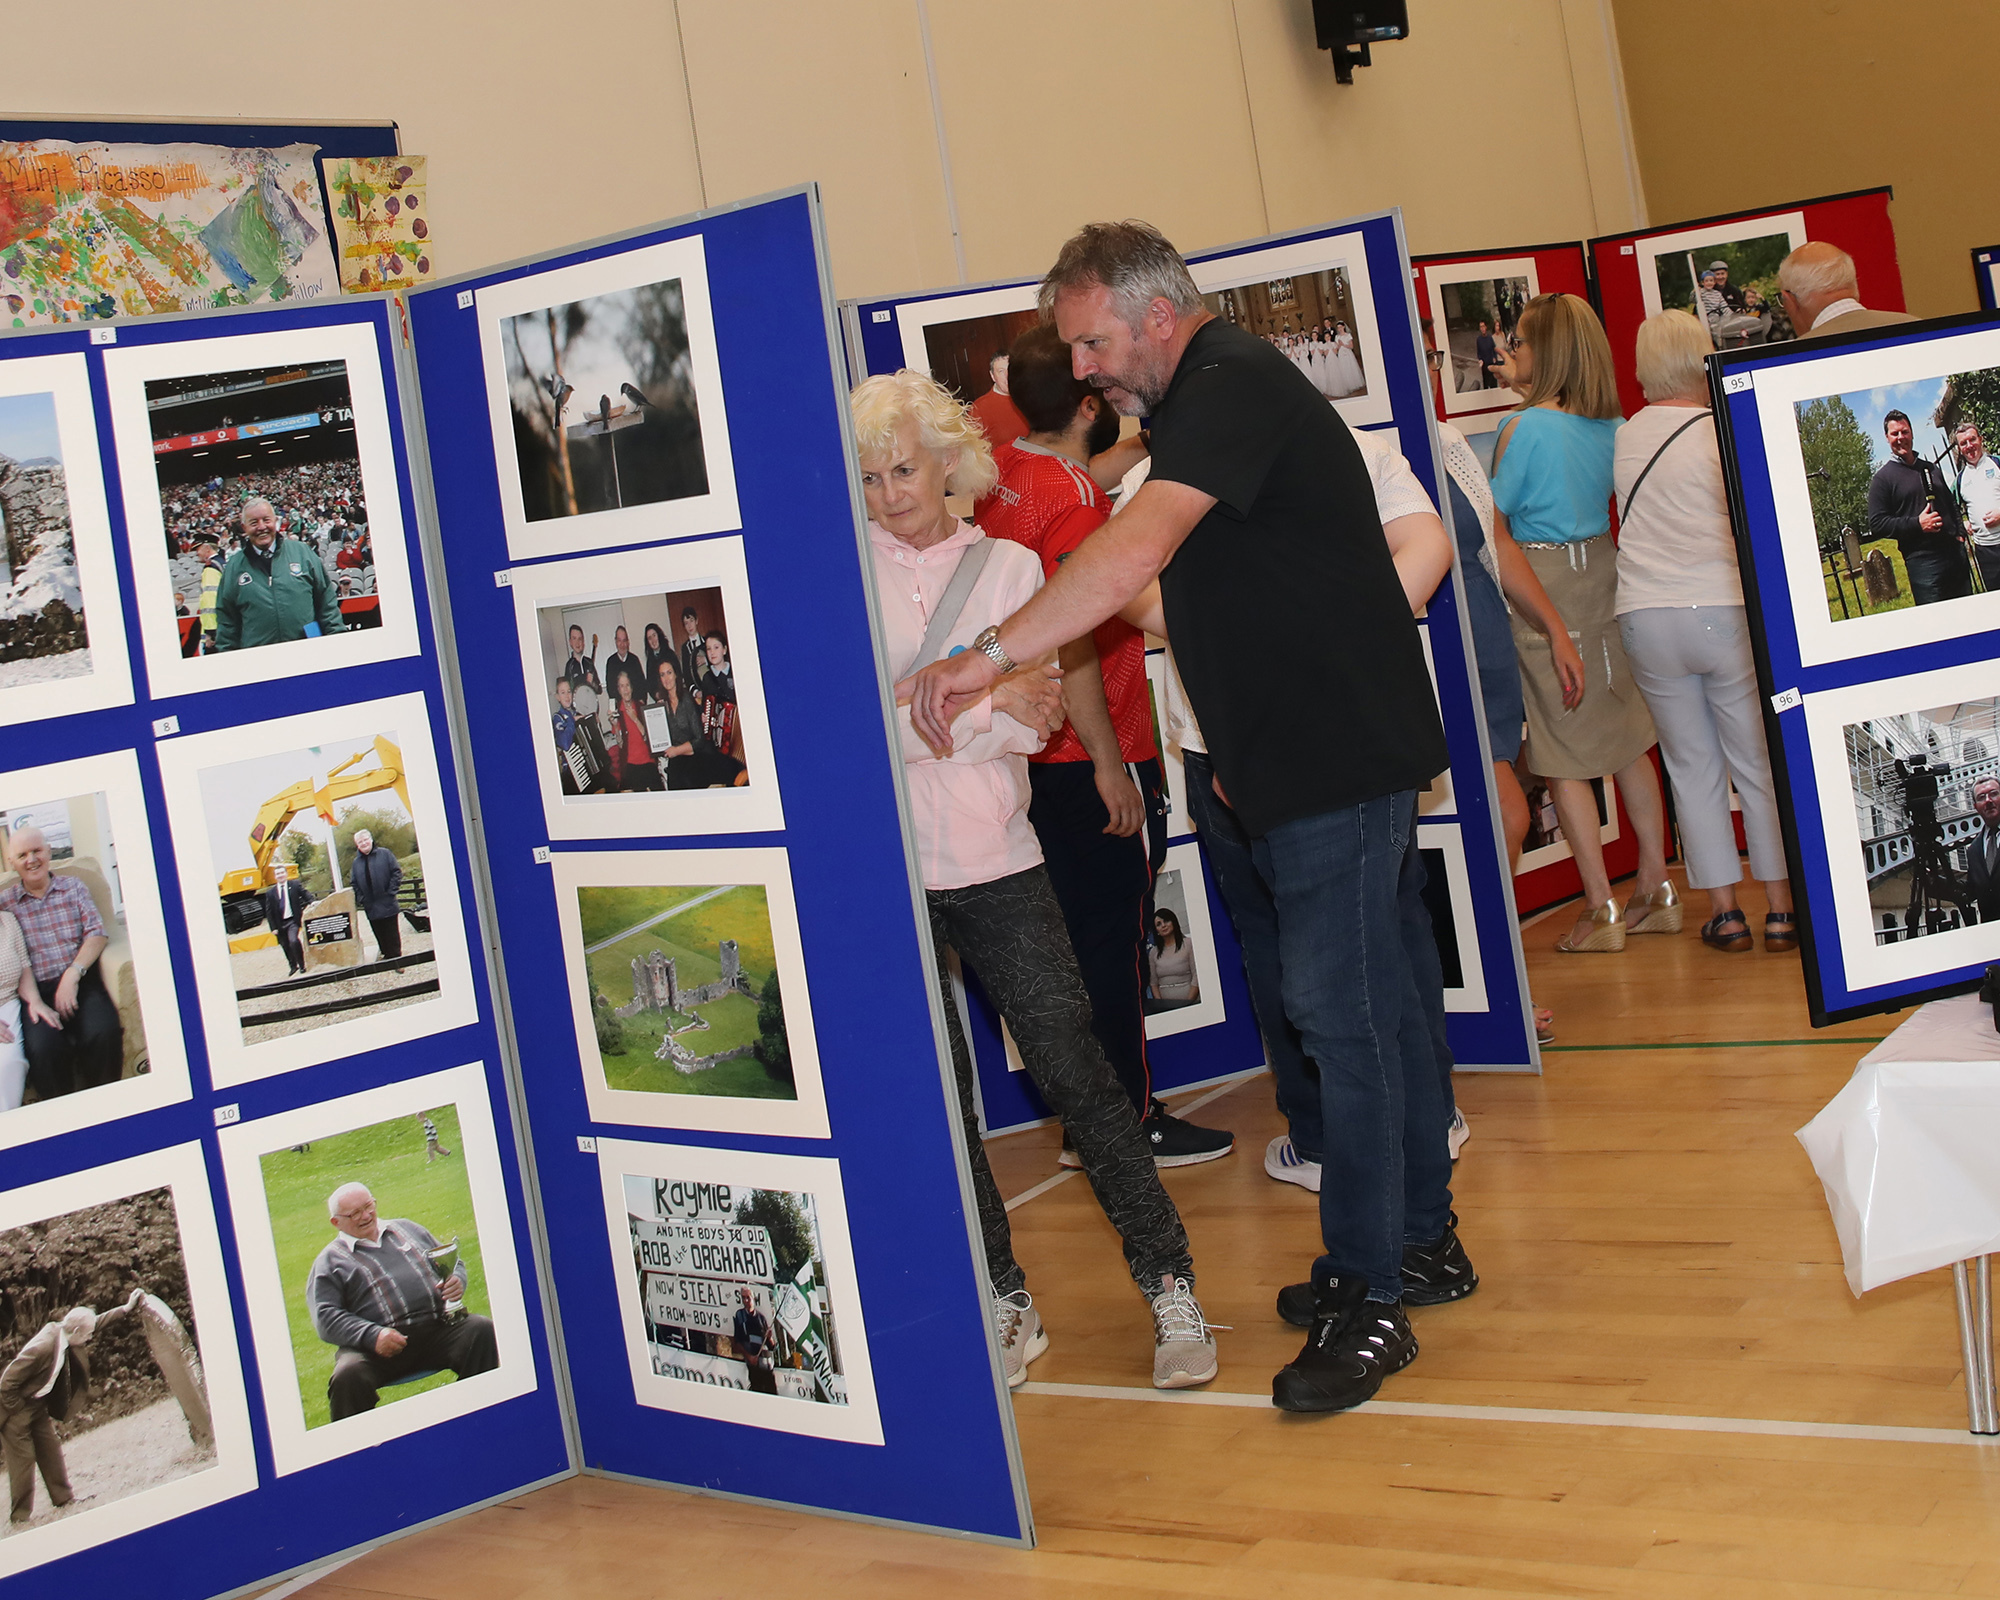 Declan Lynch and Linda Marshall looking at some of Mickeys photos in a photo exhibition of his work.